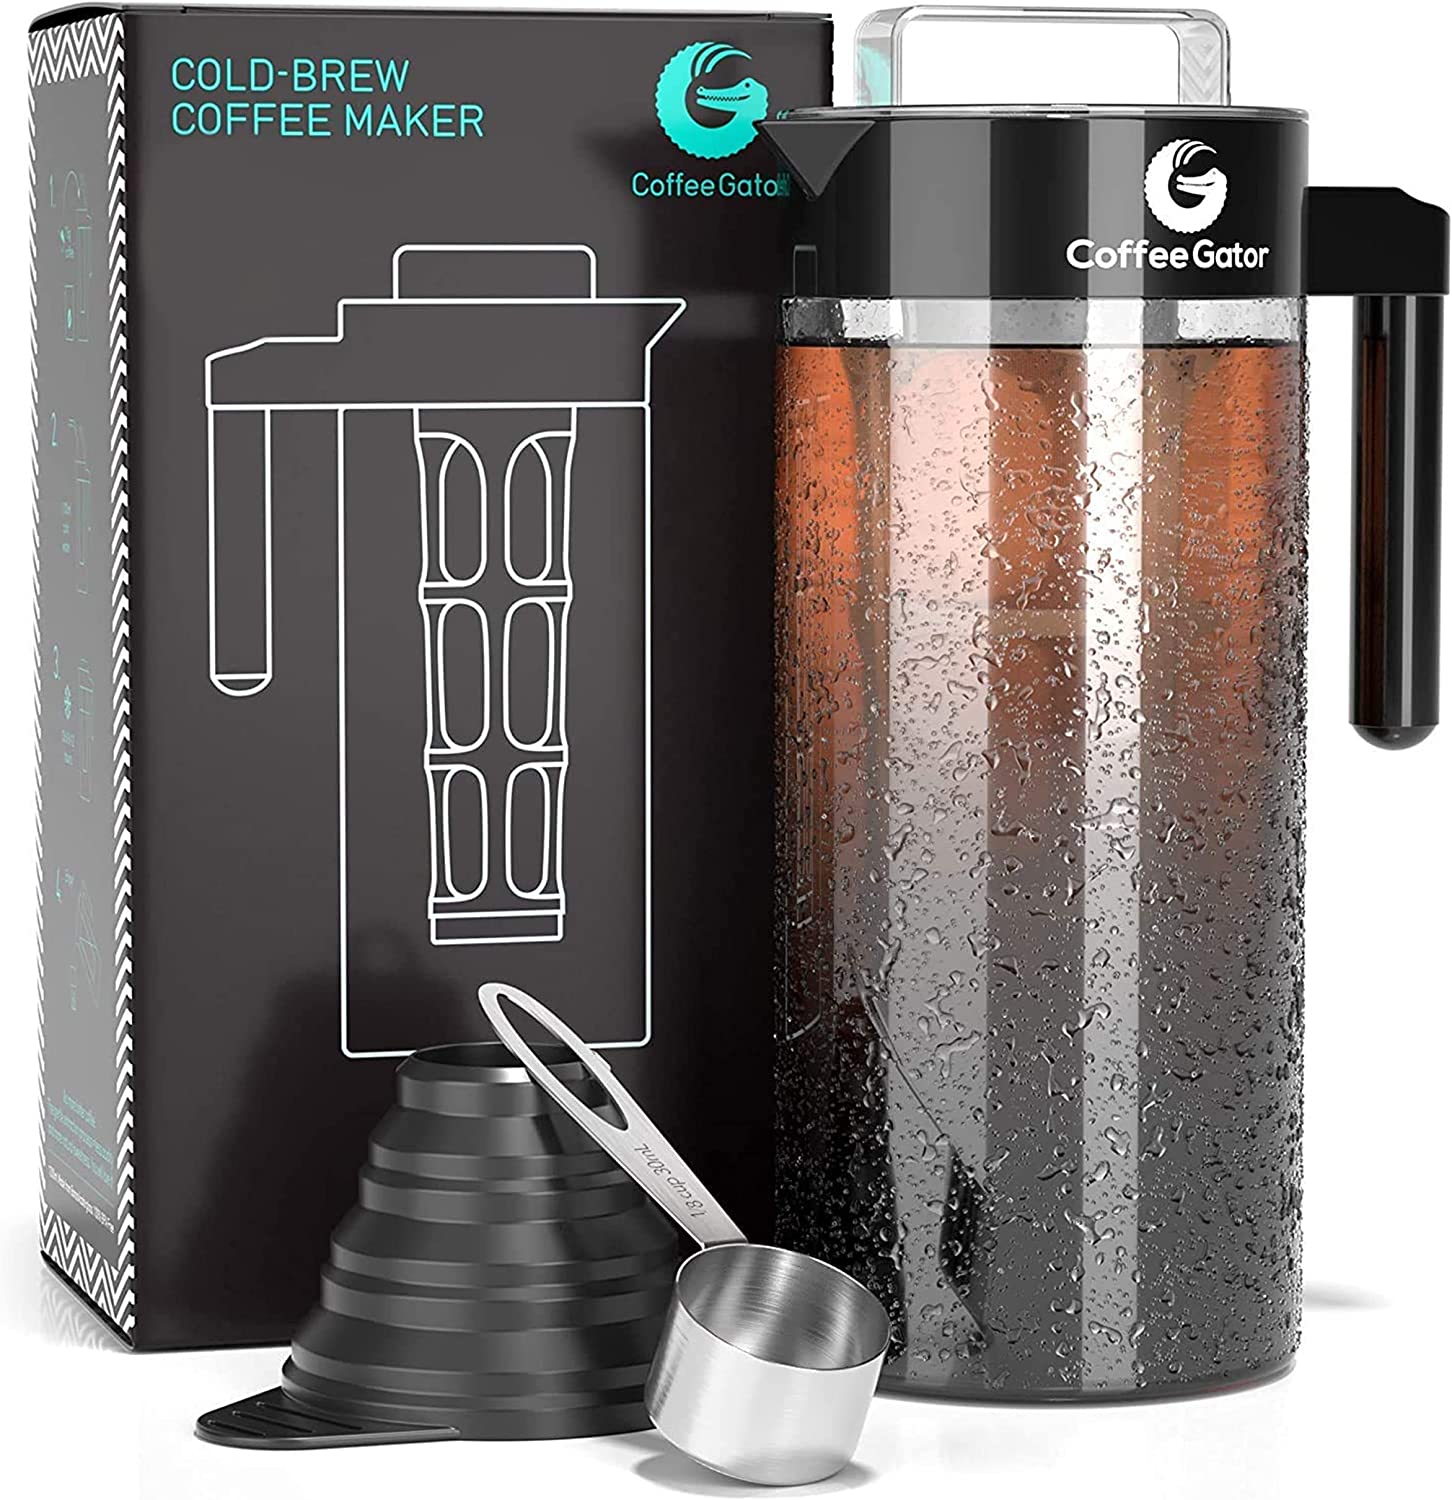  7.Coffee Gator Cold Brew Kit - Brewer with Scoop and Loading Funnel 